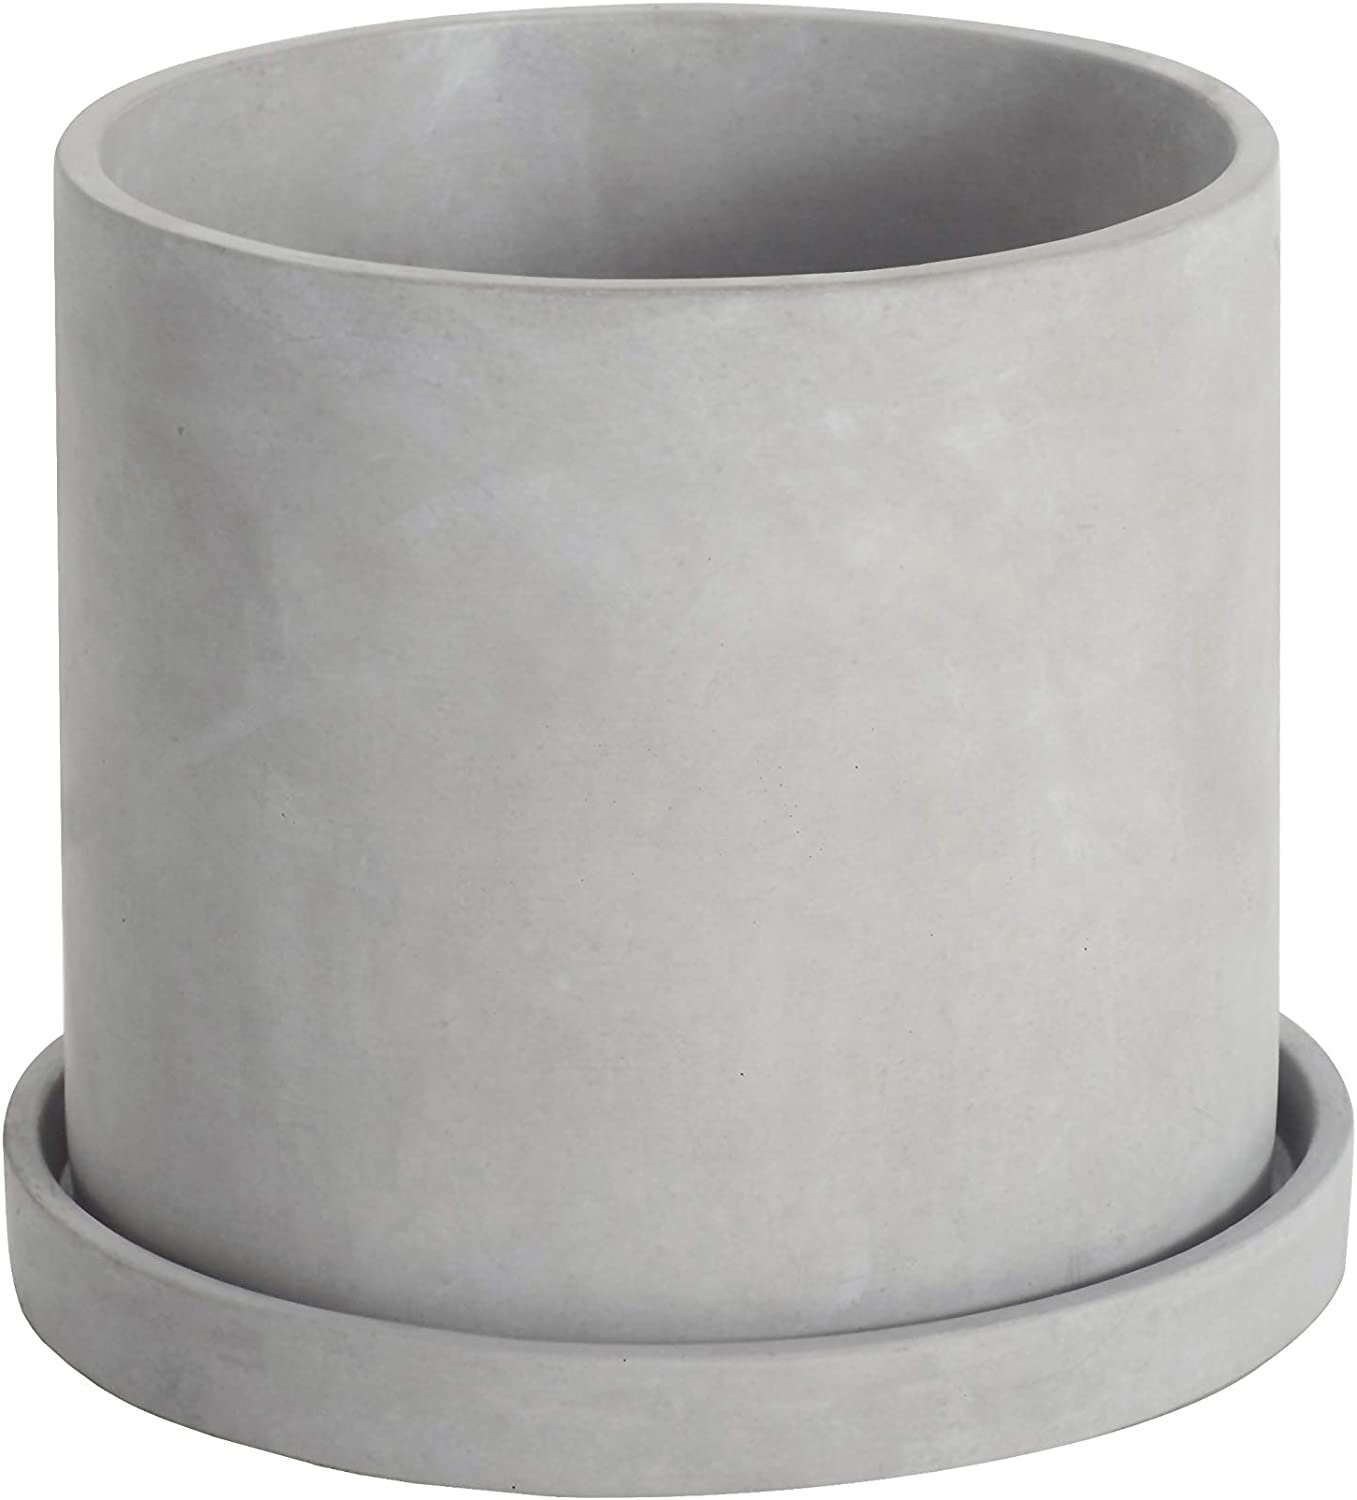 Grey Cement Planter With Drainage, Amazon